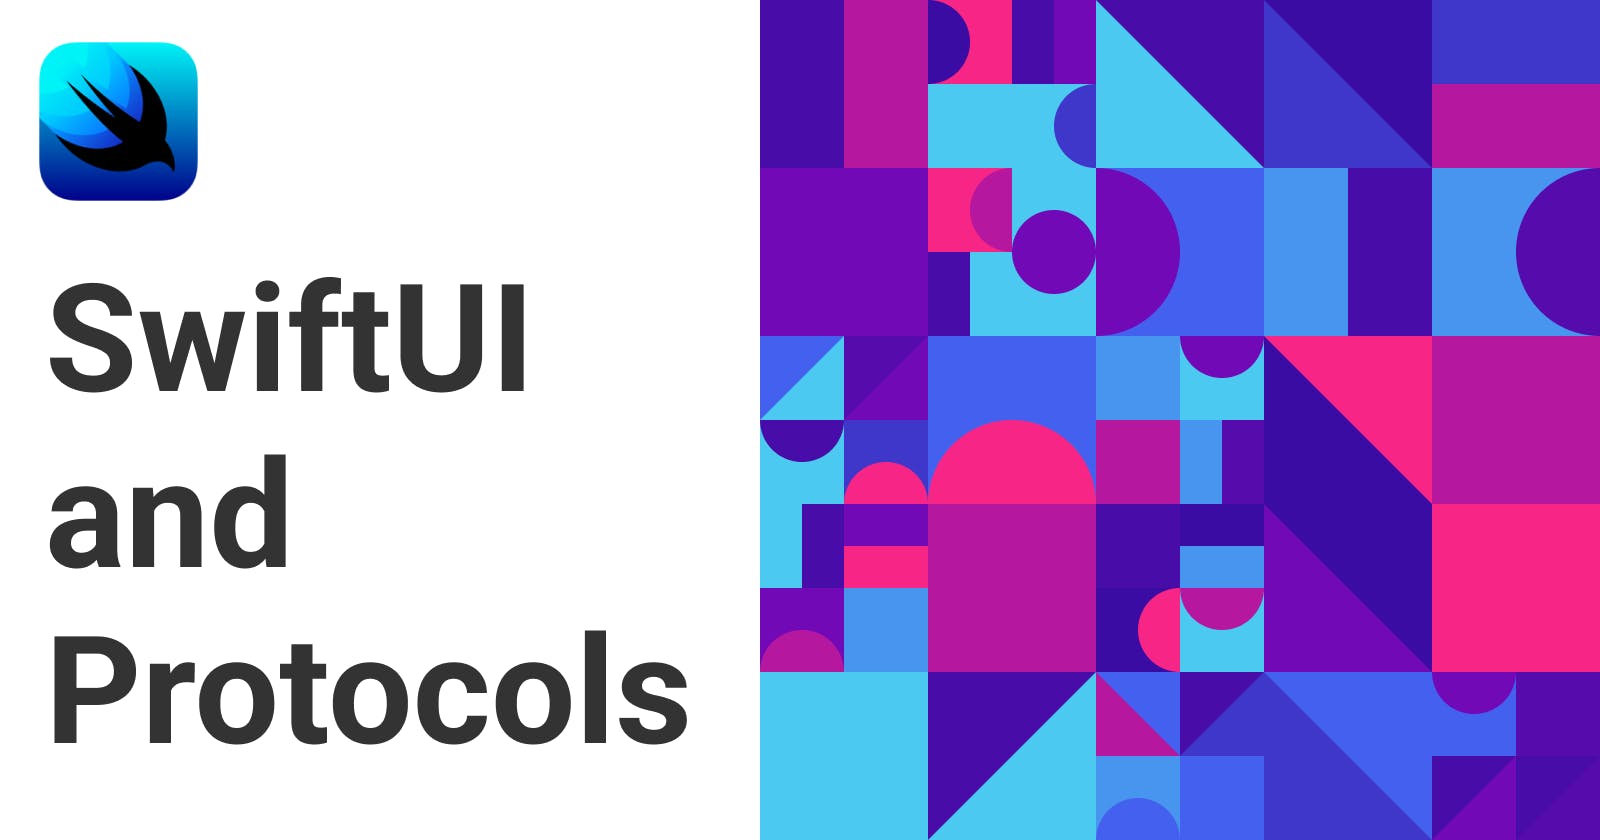 SwiftUI and Protocols: Integrating Protocol-Oriented Programming in Modern iOS Development